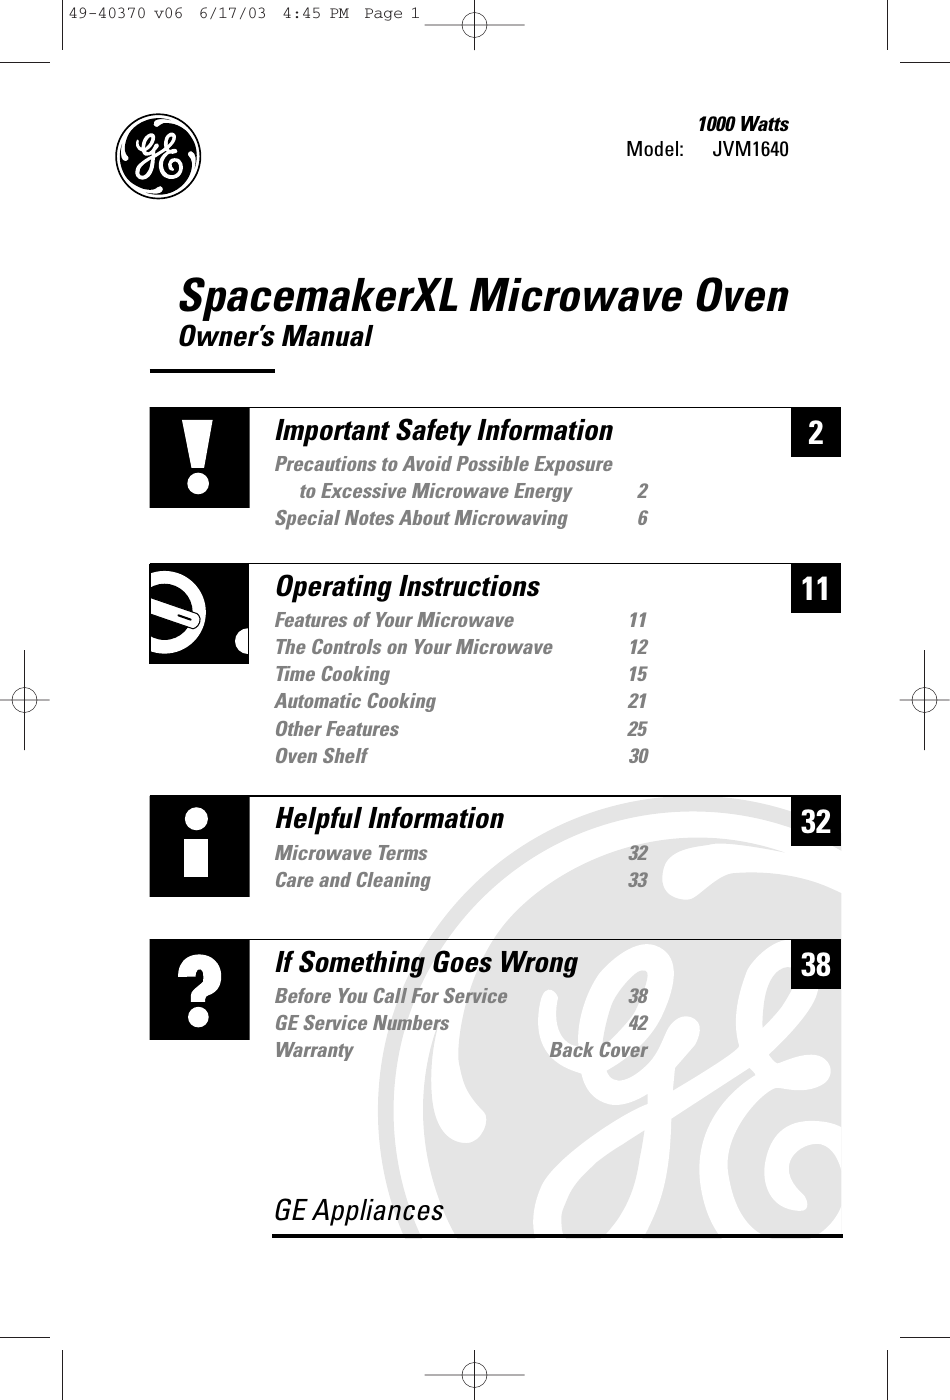 SpacemakerXL Microwave OvenOwner’s ManualModel: 1000 WattsJVM1640232Helpful InformationMicrowave Terms 32Care and Cleaning 3338If Something Goes WrongBefore You Call For Service 38GE Service Numbers 42Warranty Back CoverGE Appliances11Important Safety InformationPrecautions to Avoid Possible Exposure to Excessive Microwave Energy 2Special Notes About Microwaving 6Operating InstructionsFeatures of Your Microwave 11The Controls on Your Microwave 12Time Cooking 15Automatic Cooking 21Other Features 25Oven Shelf 3049-40370 v06  6/17/03  4:45 PM  Page 1